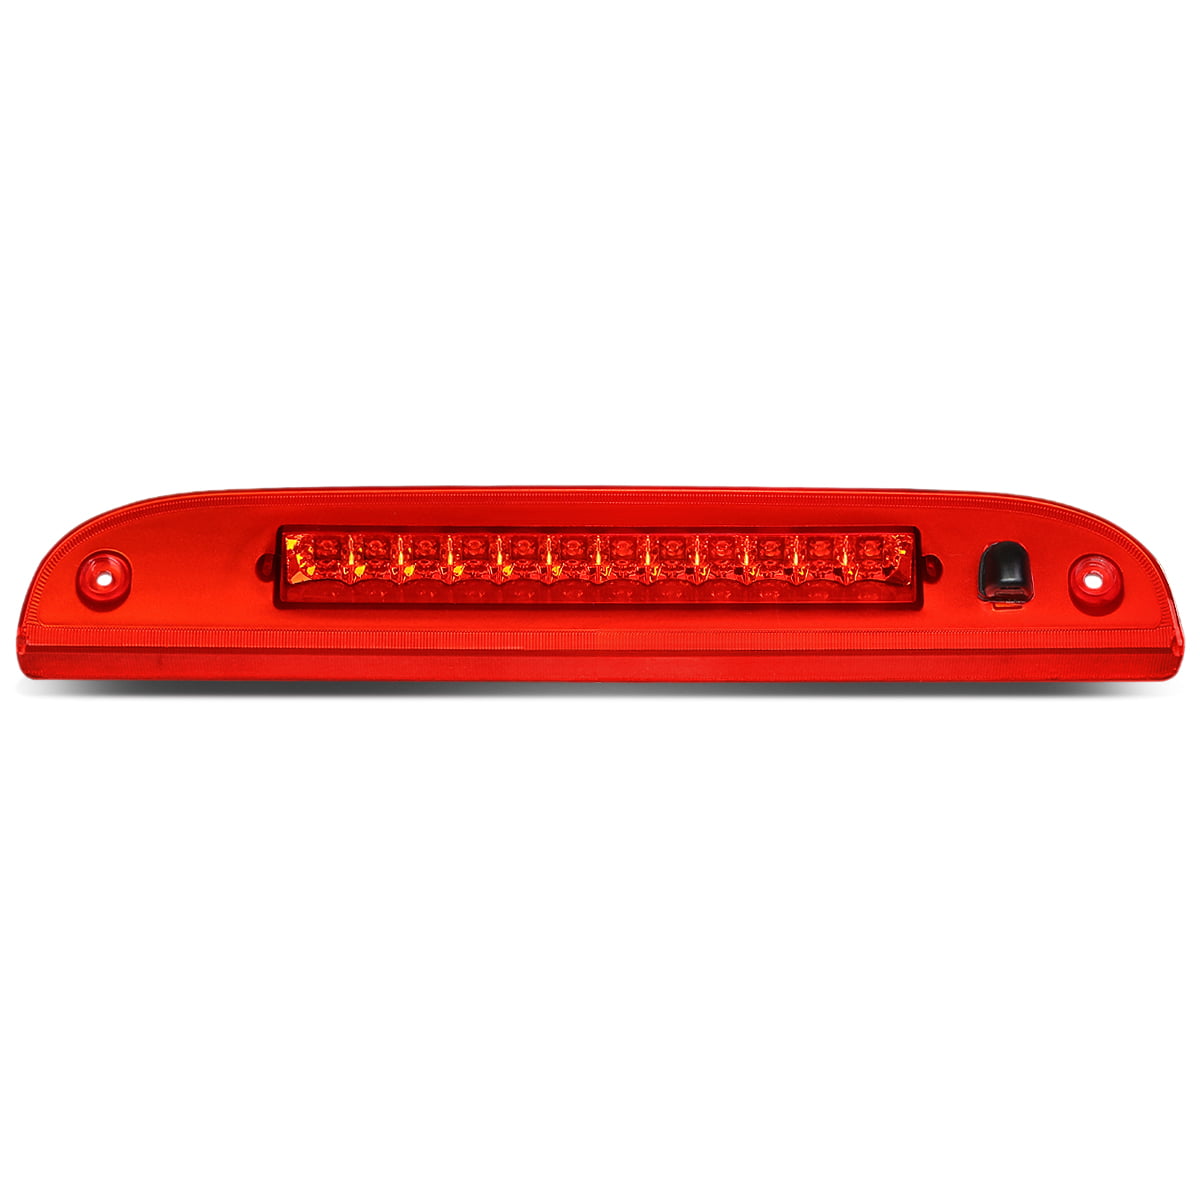 Ford Escape,Mercury Mountaineer Third Center Cargo Reverse Rear LED Brake Light Bar Taillight Red High Mount 3rd Stop Light Assemblies,Compatible with 2002-2010 Ford Explorer 08-11 Mercury Mariner 